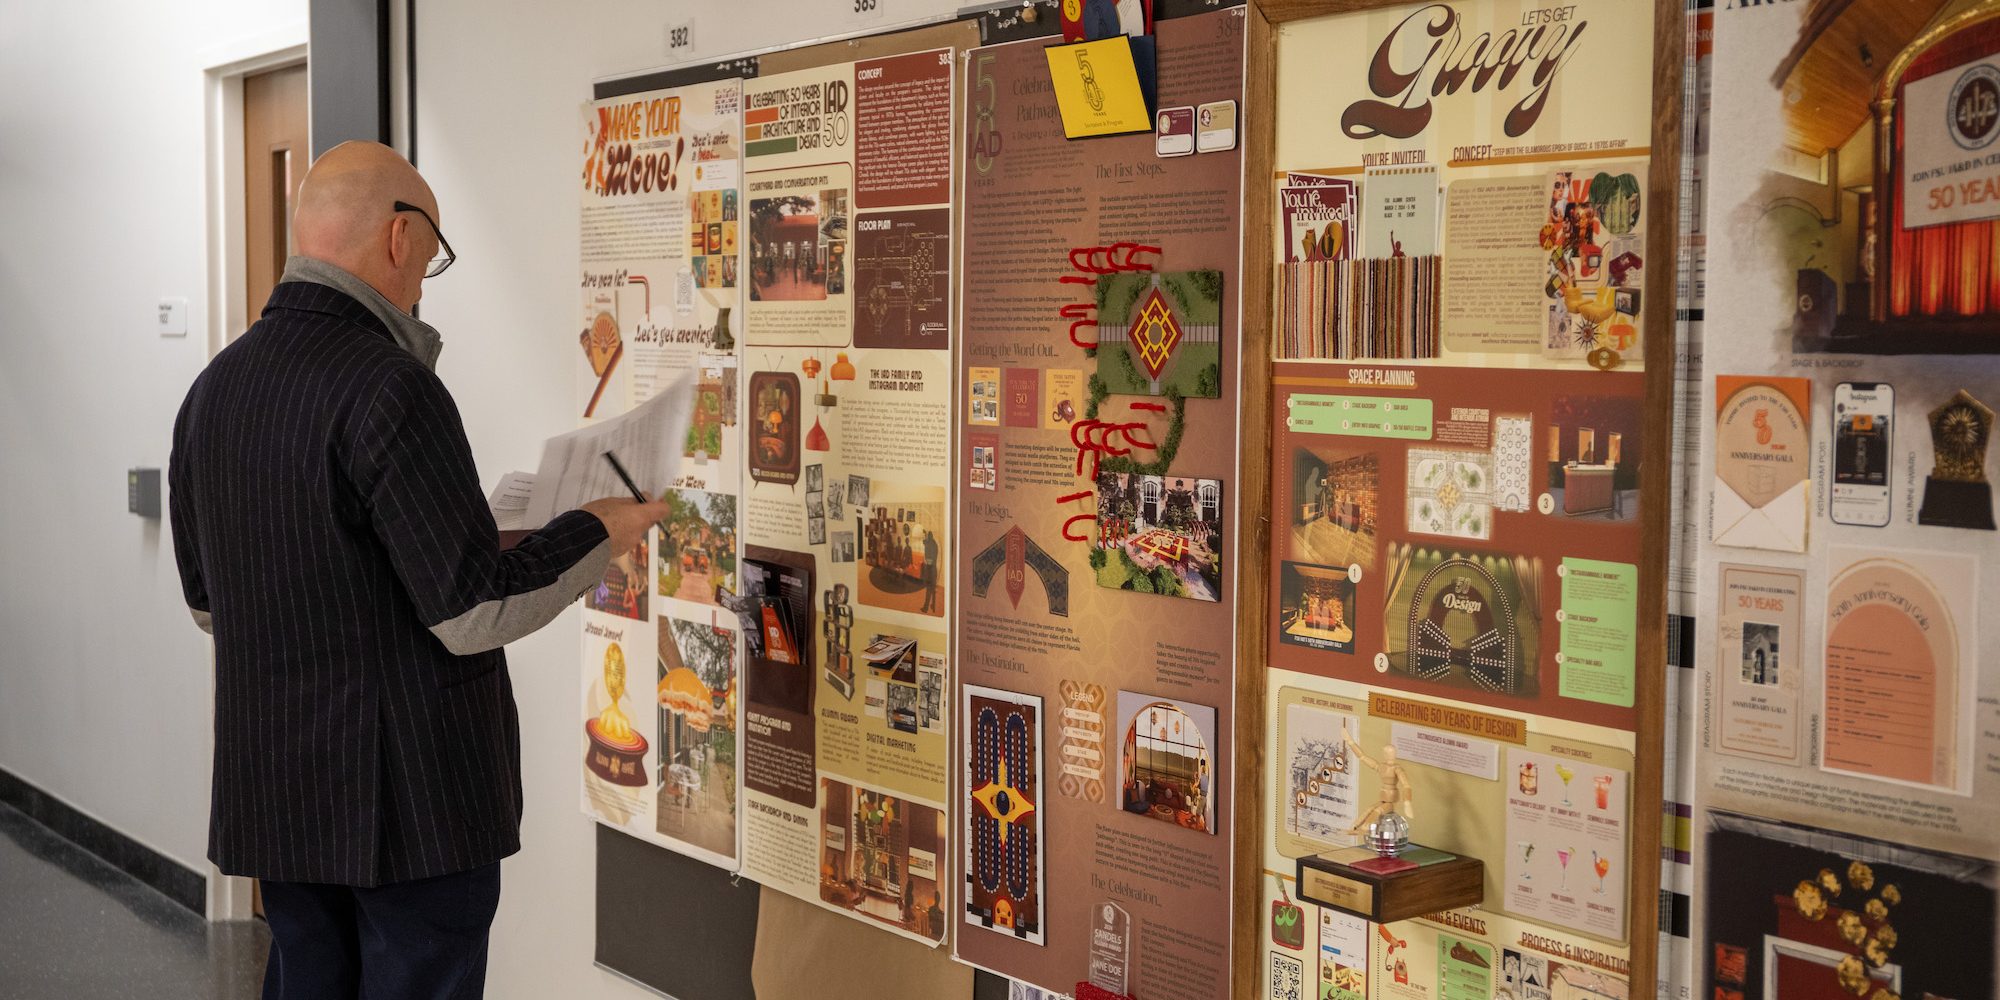 A man examines posters on a bulletin board